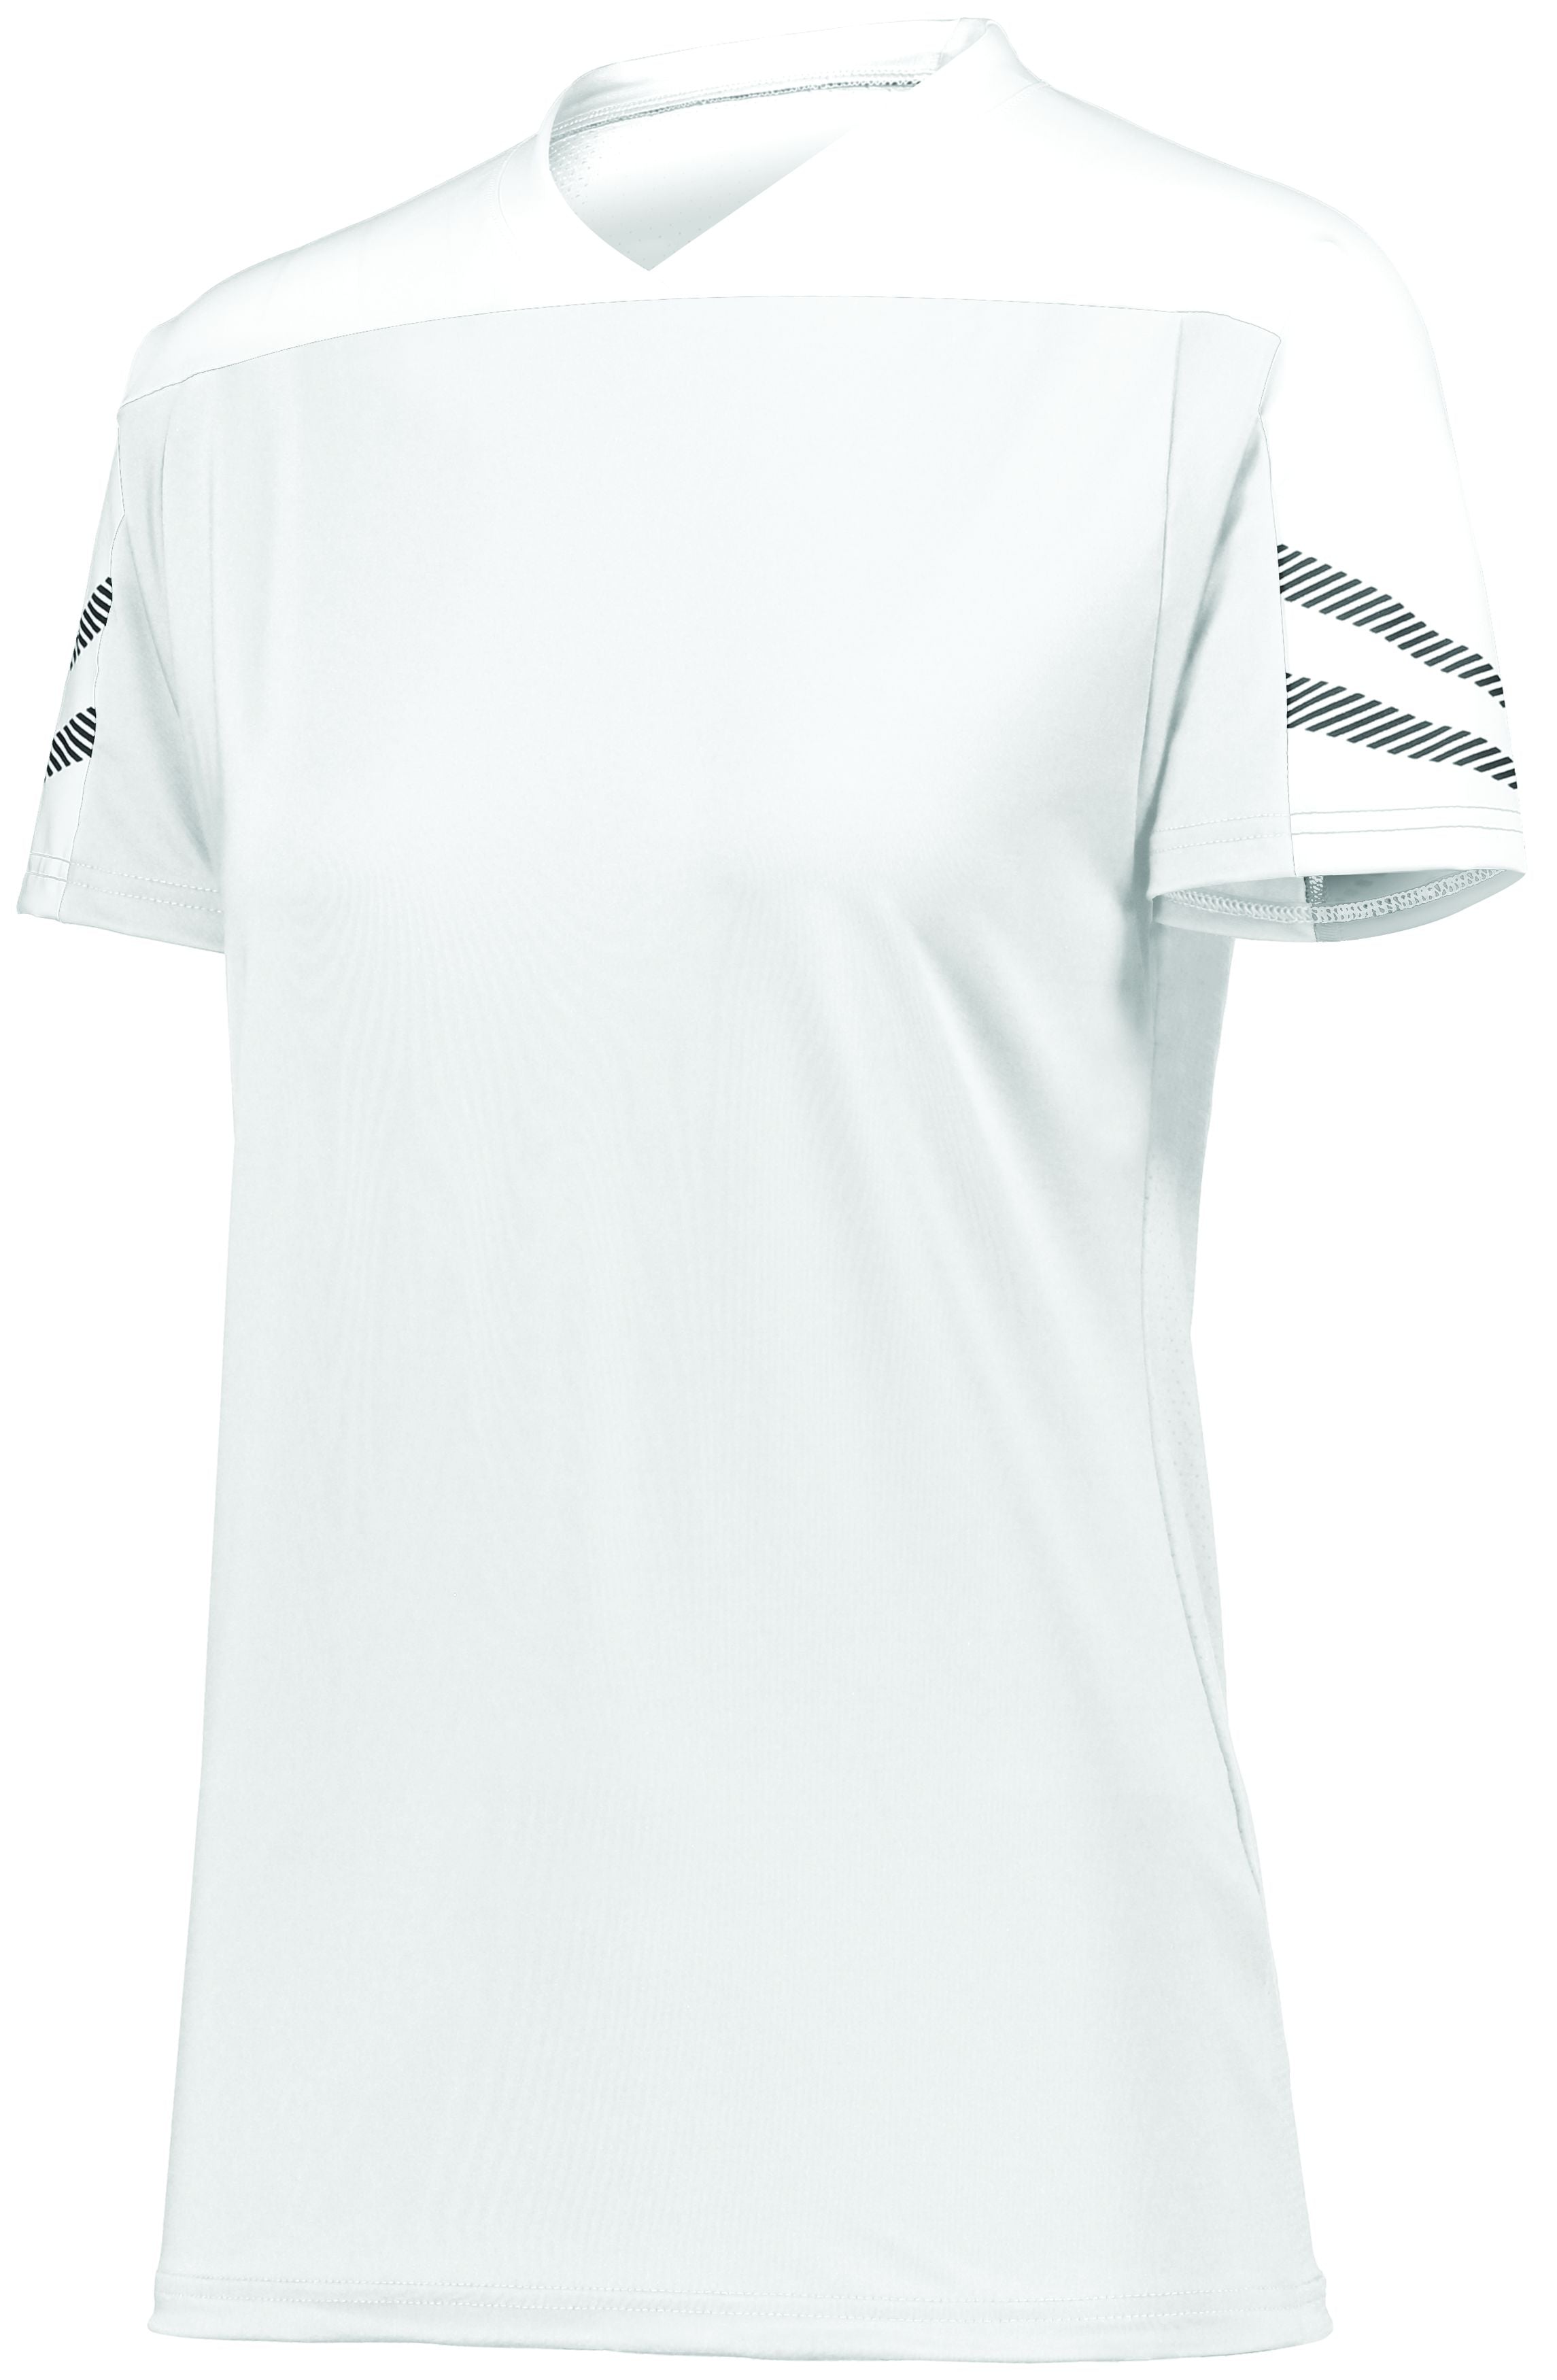 High 5 Ladies Anfield Soccer Jersey in White/White/Black  -Part of the Ladies, Ladies-Jersey, High5-Products, Soccer, Shirts, All-Sports-1 product lines at KanaleyCreations.com